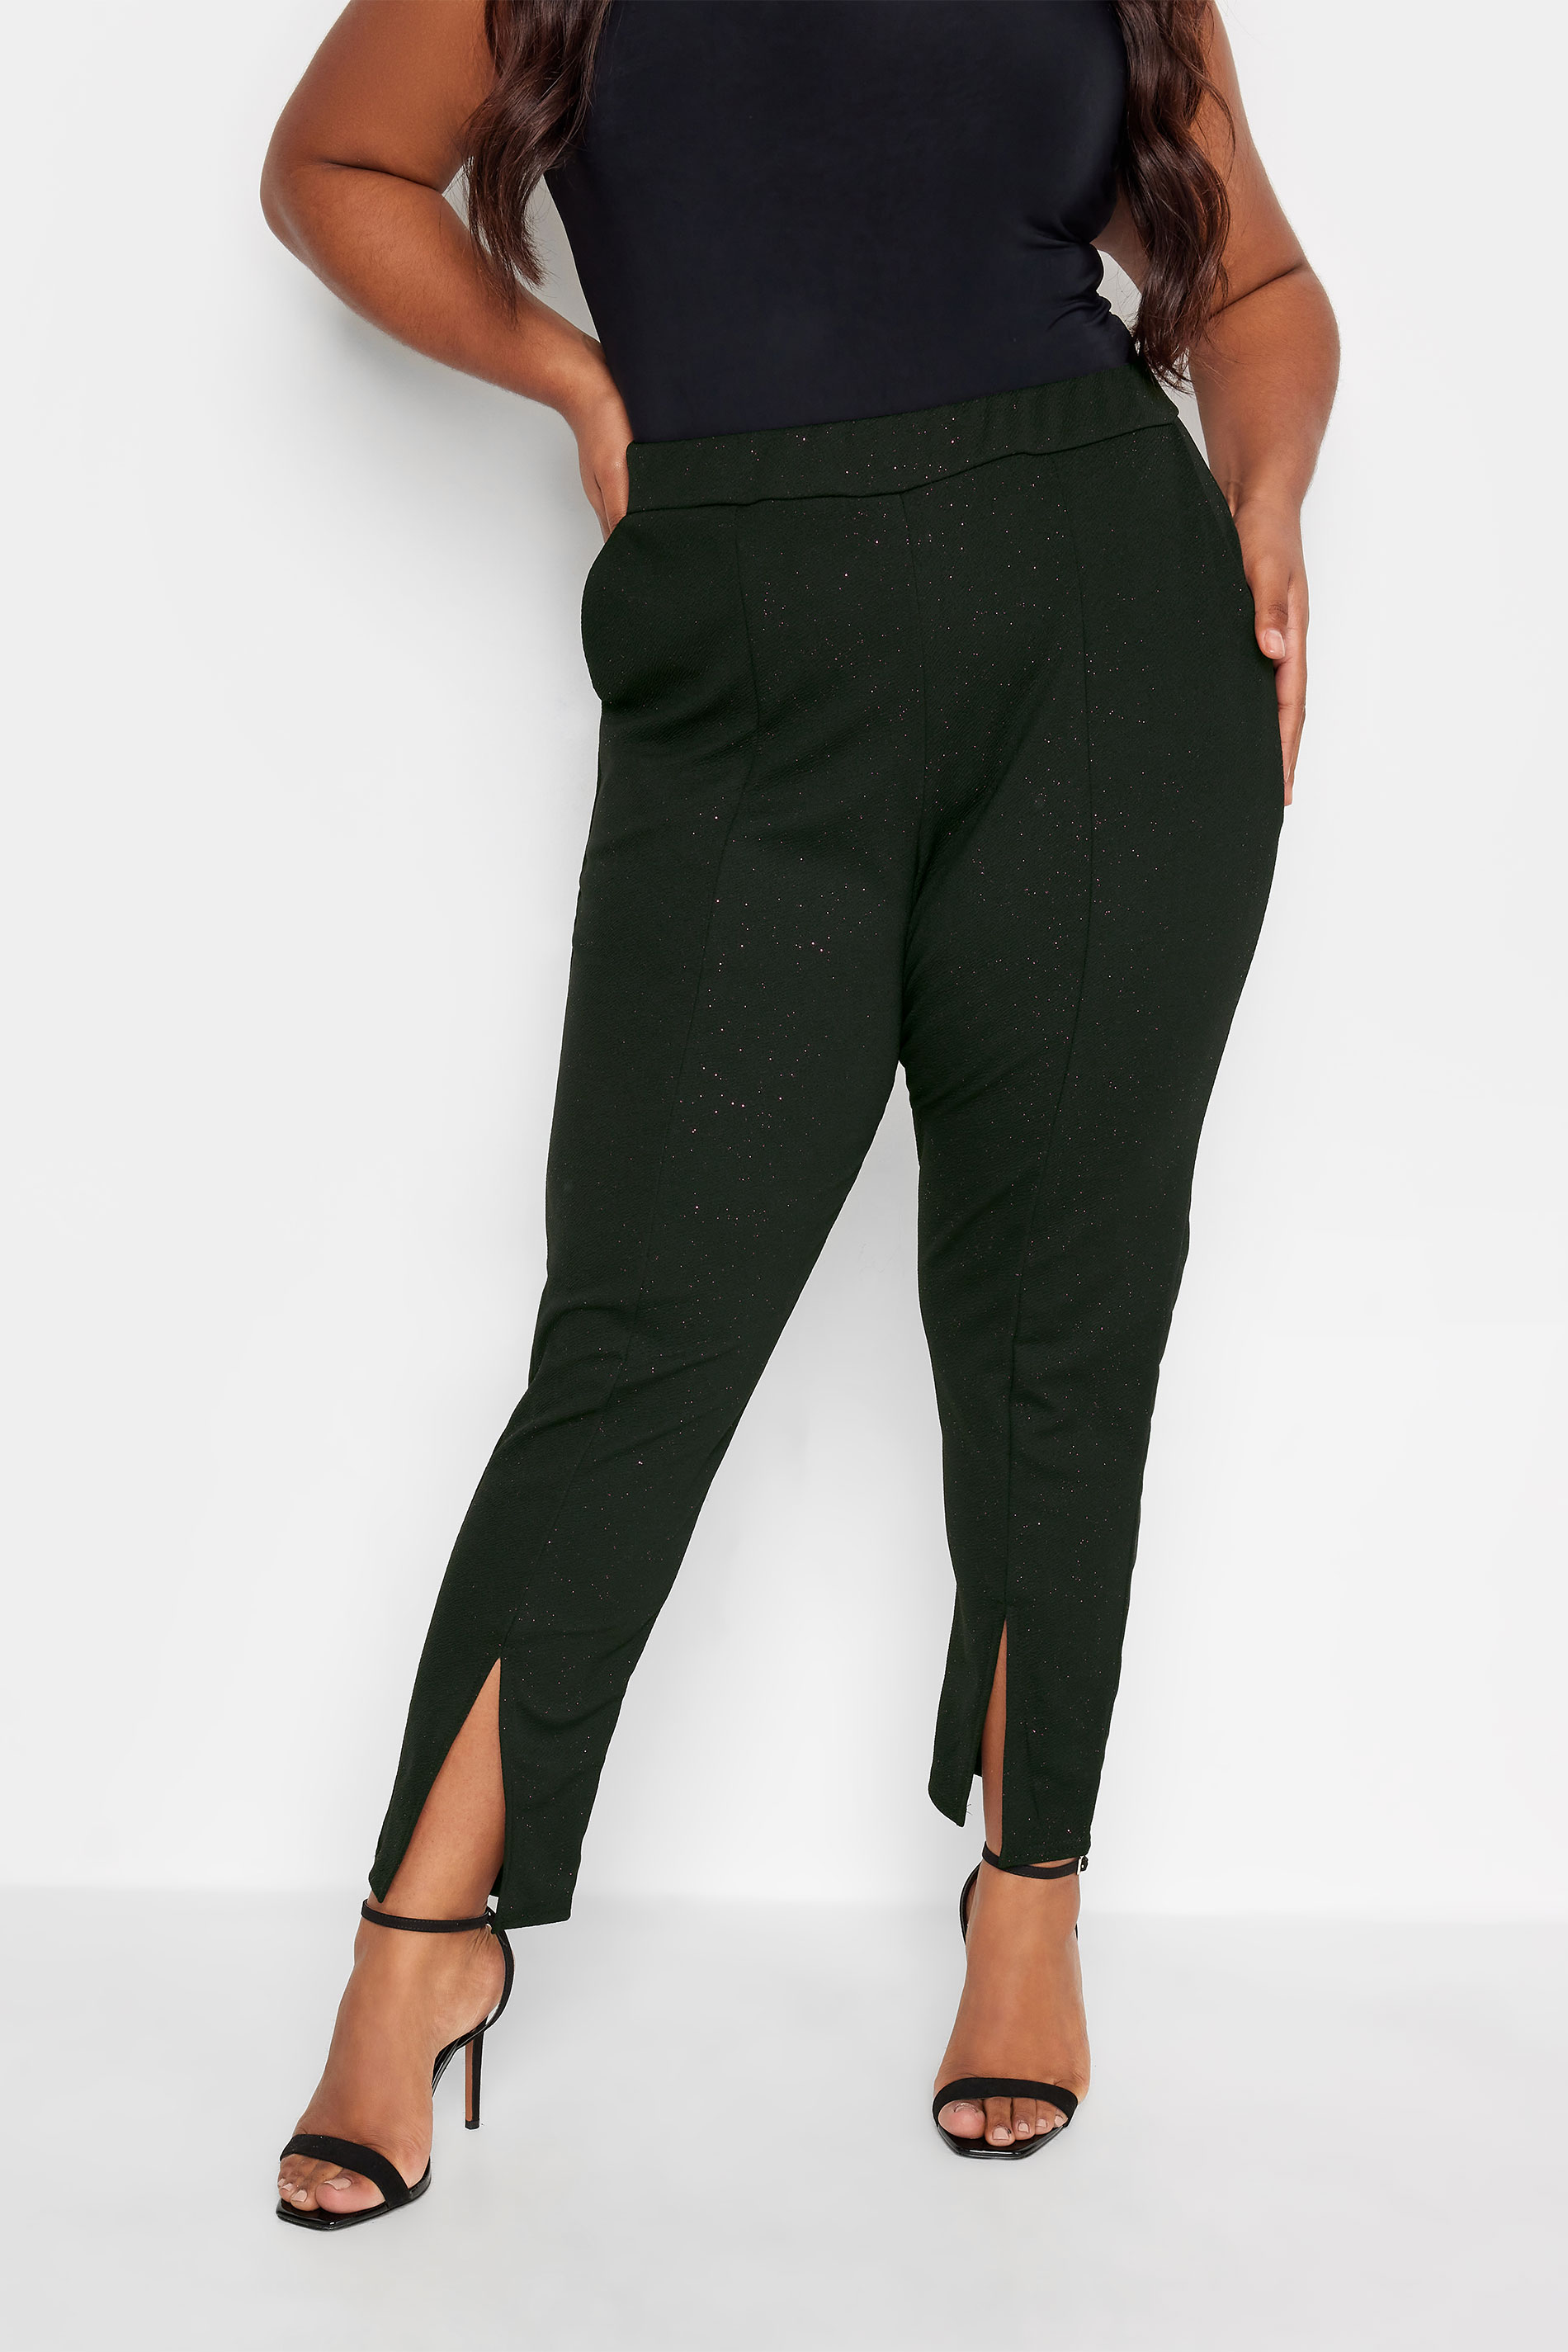 LIMITED COLLECTION Plus Size Black & Pink Glitter Split Hem Tapered Trousers | Yours Clothing 1